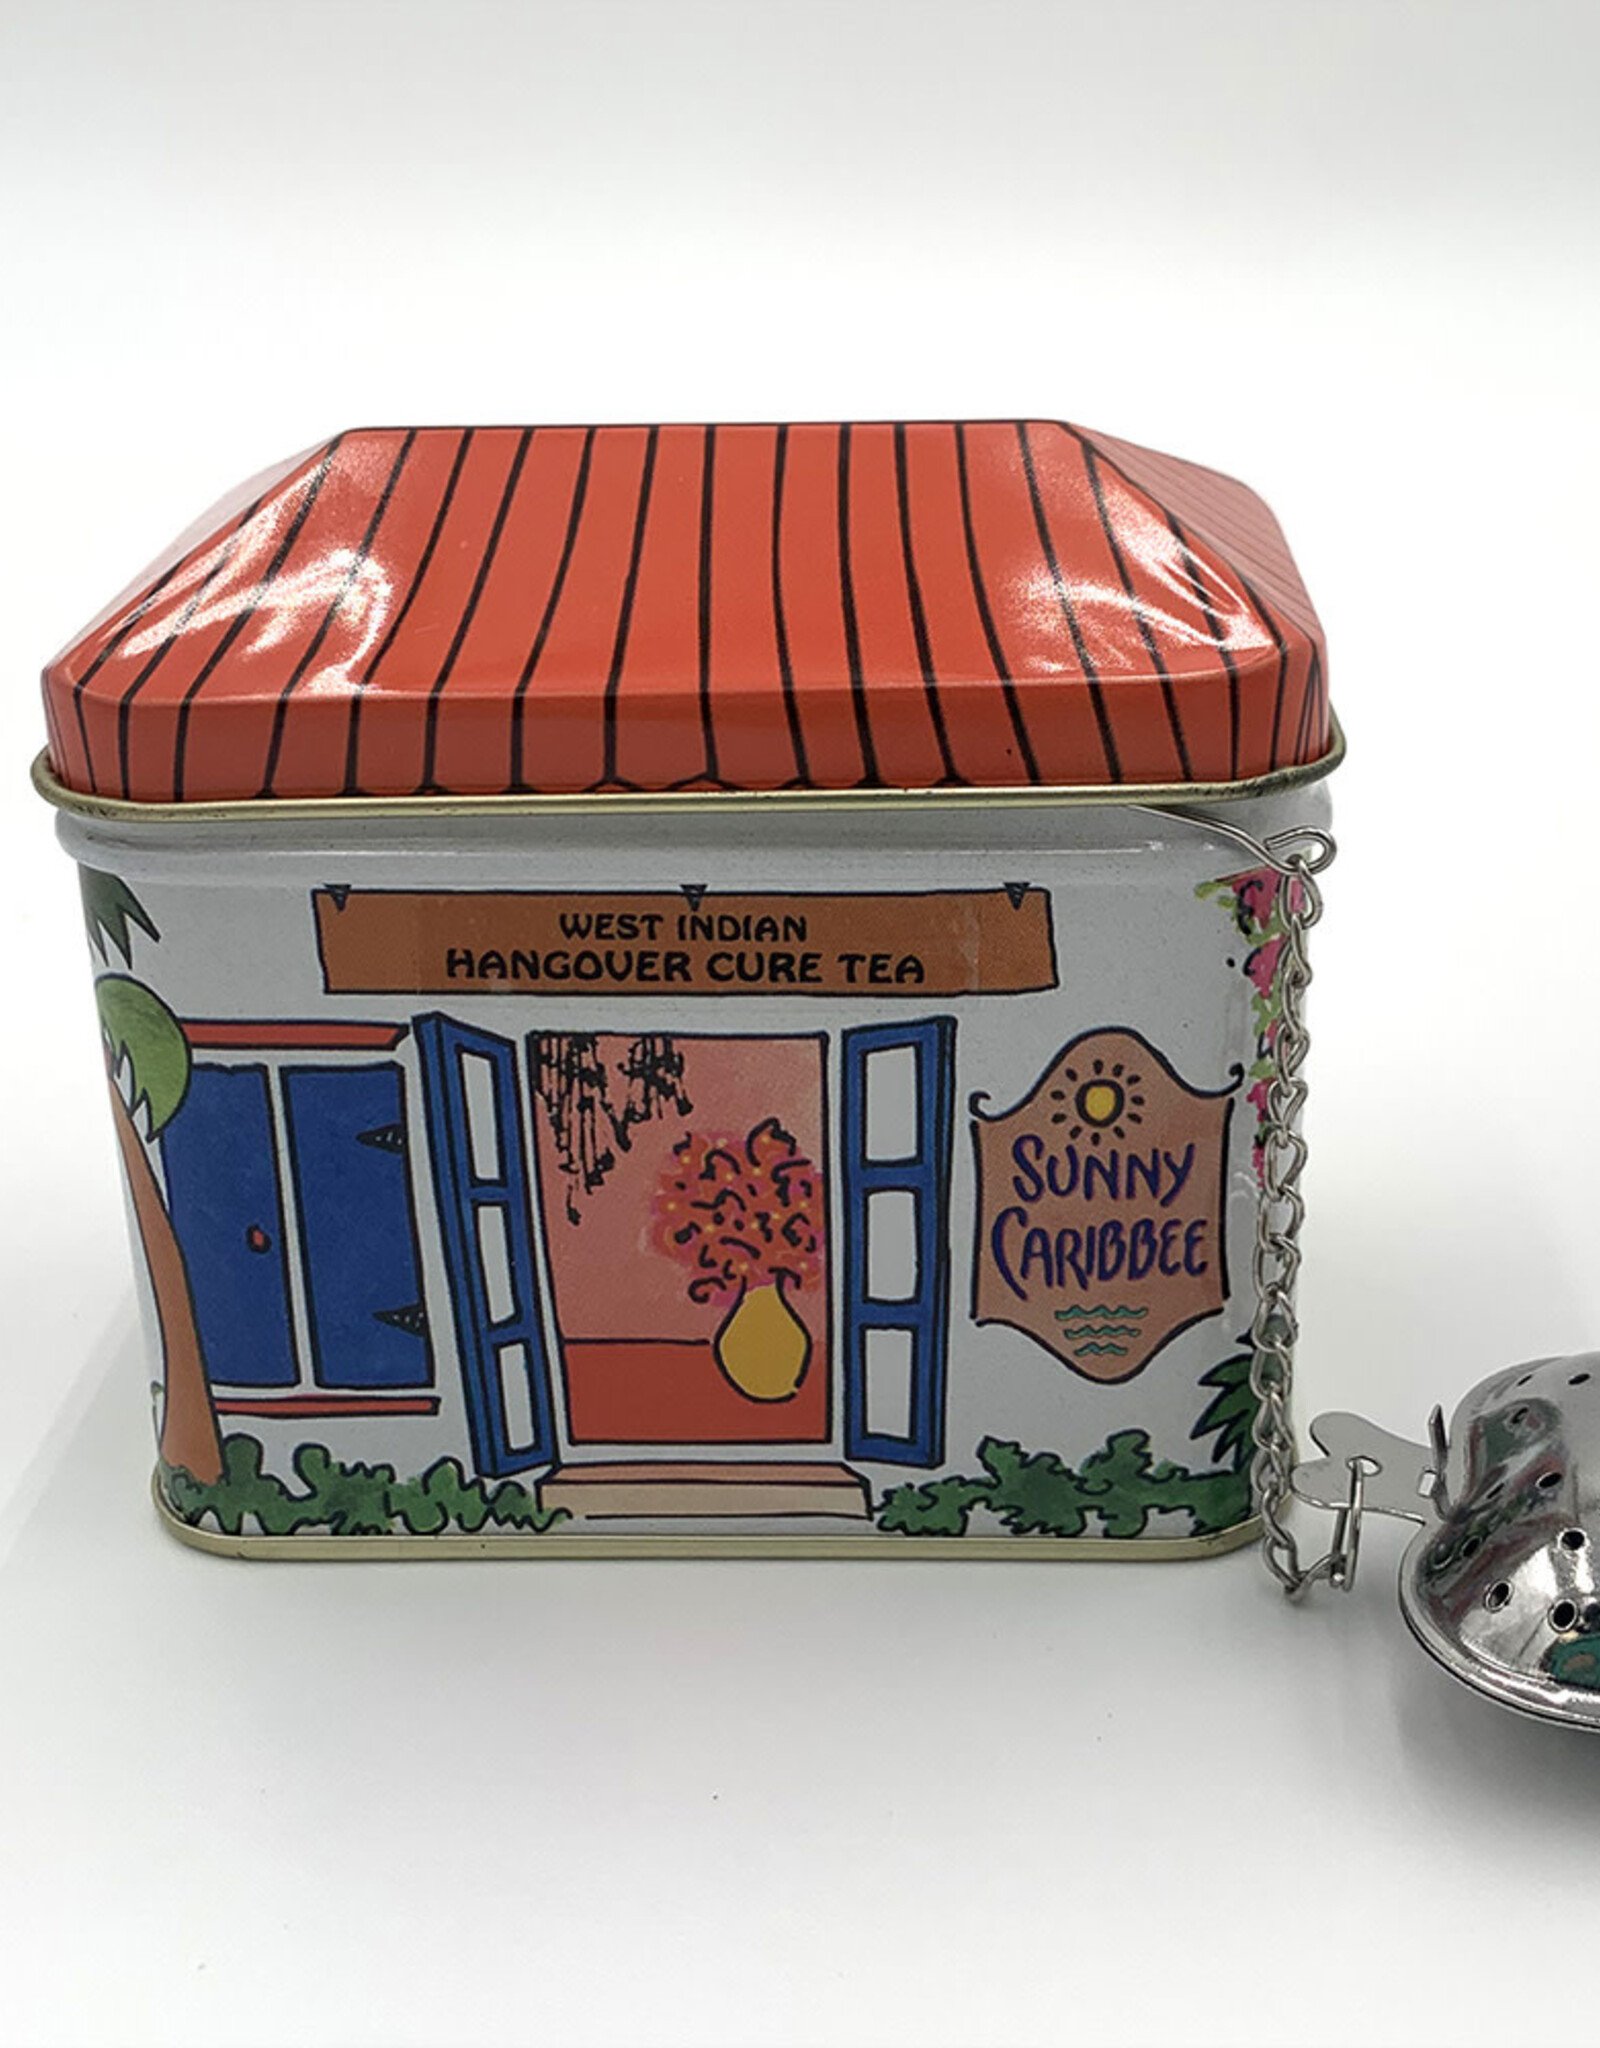 Sunny Caribbee Sunny Caribbee - West Indian Hangover Cure Tea Tin with Infuser